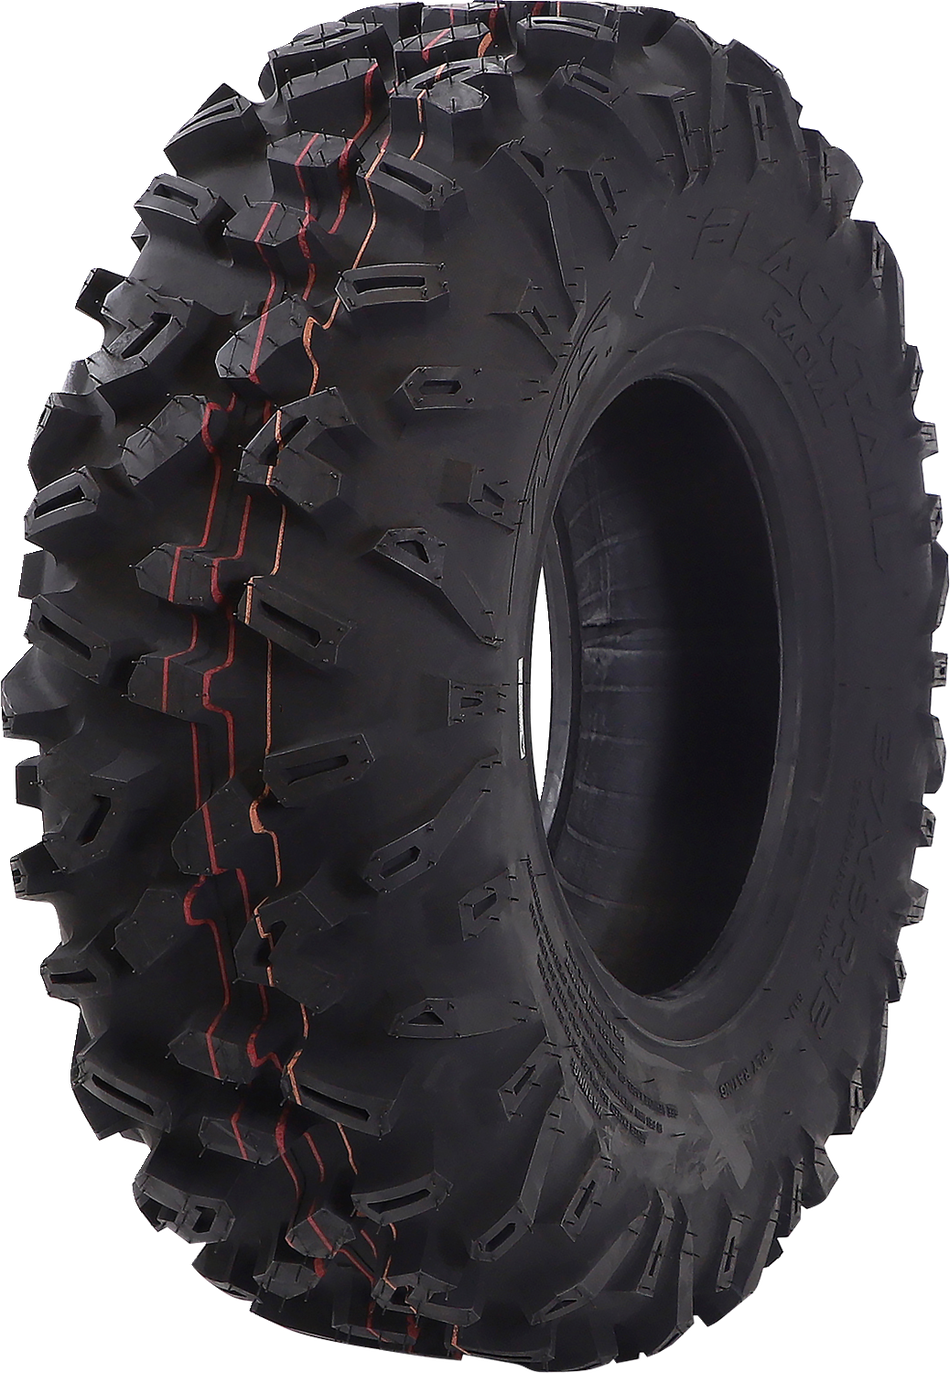 AMS Tire - Blacktail - Front - 27x9R12 - 6 Ply 1279-361